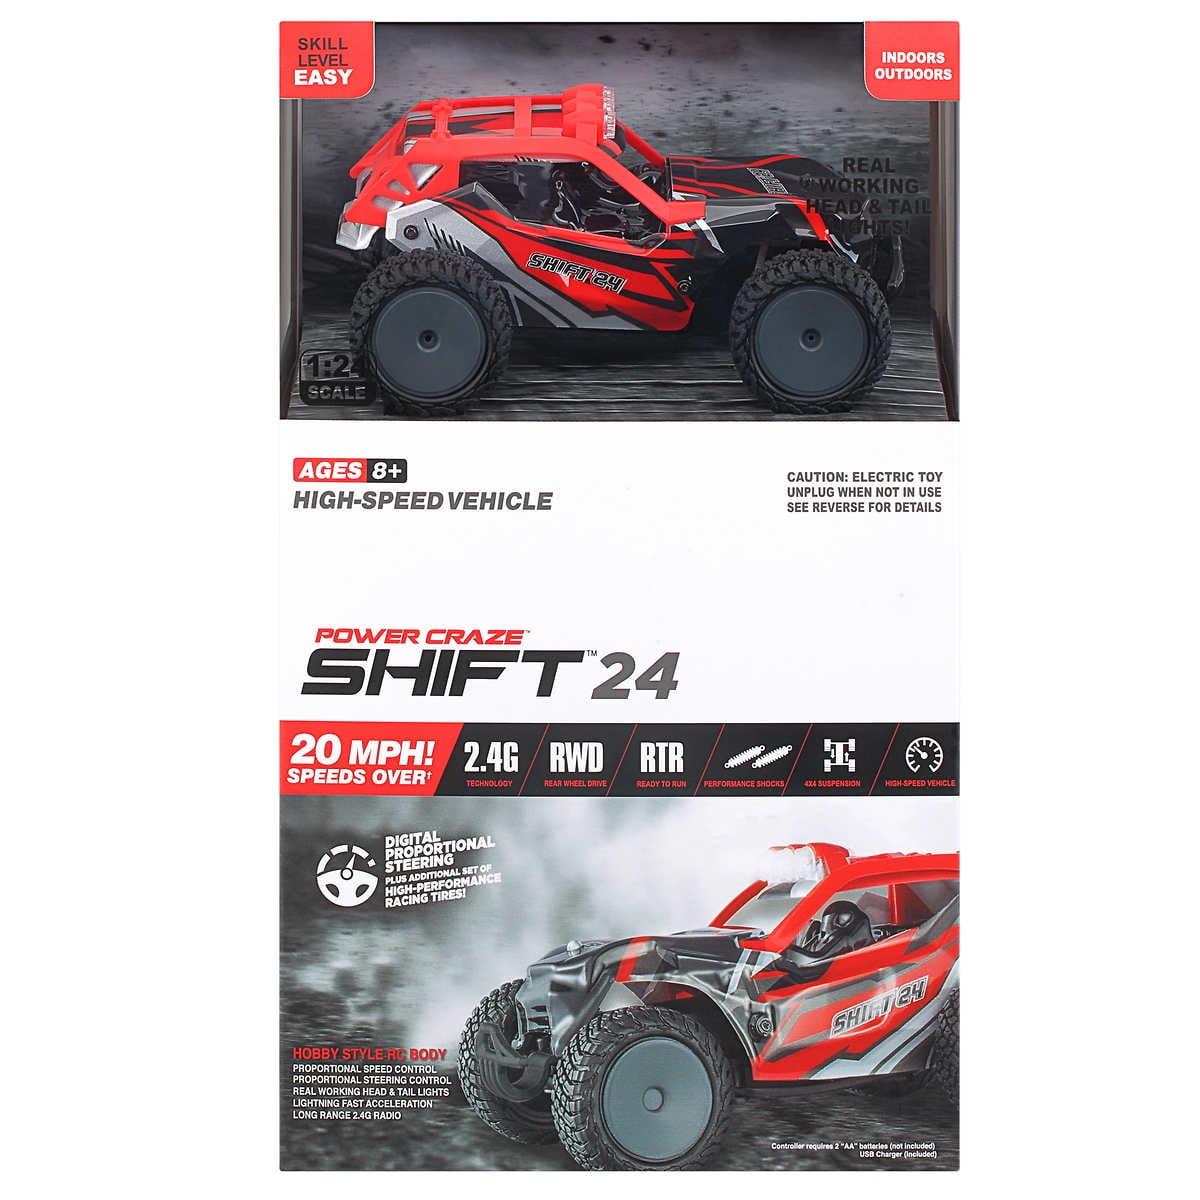 Power Craze Rc: Affordable and Fun: Power Craze RC Cars are the Perfect Hobby for All Ages